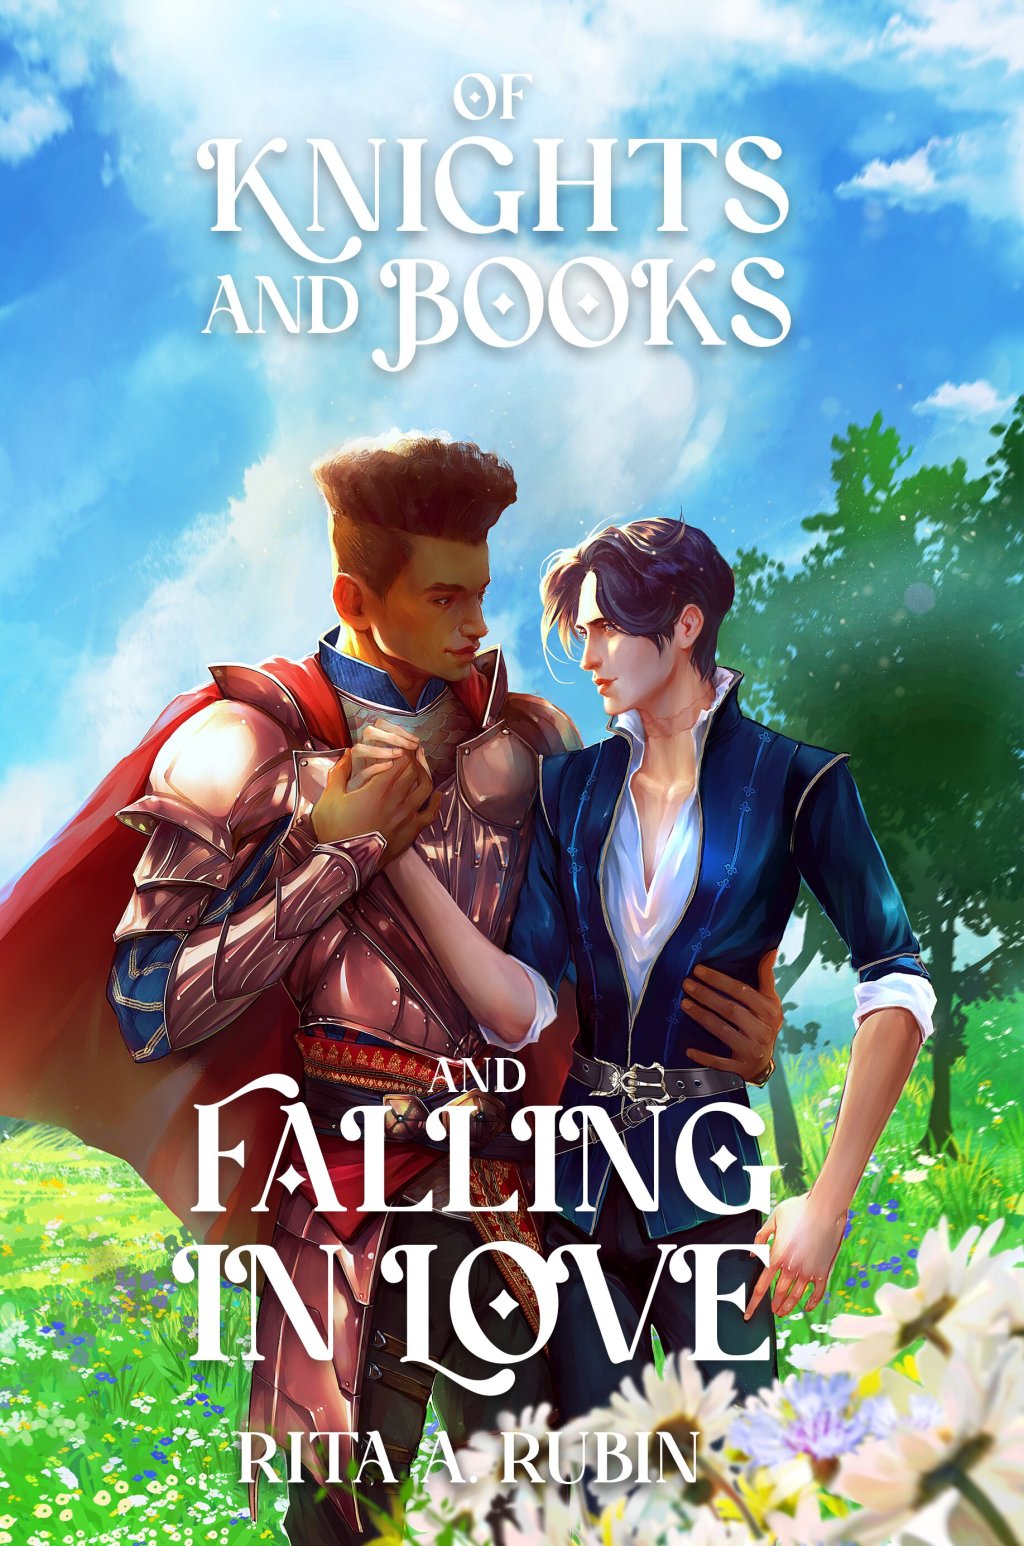 Of Knights and Books and Falling In Love by Rita A. Rubin